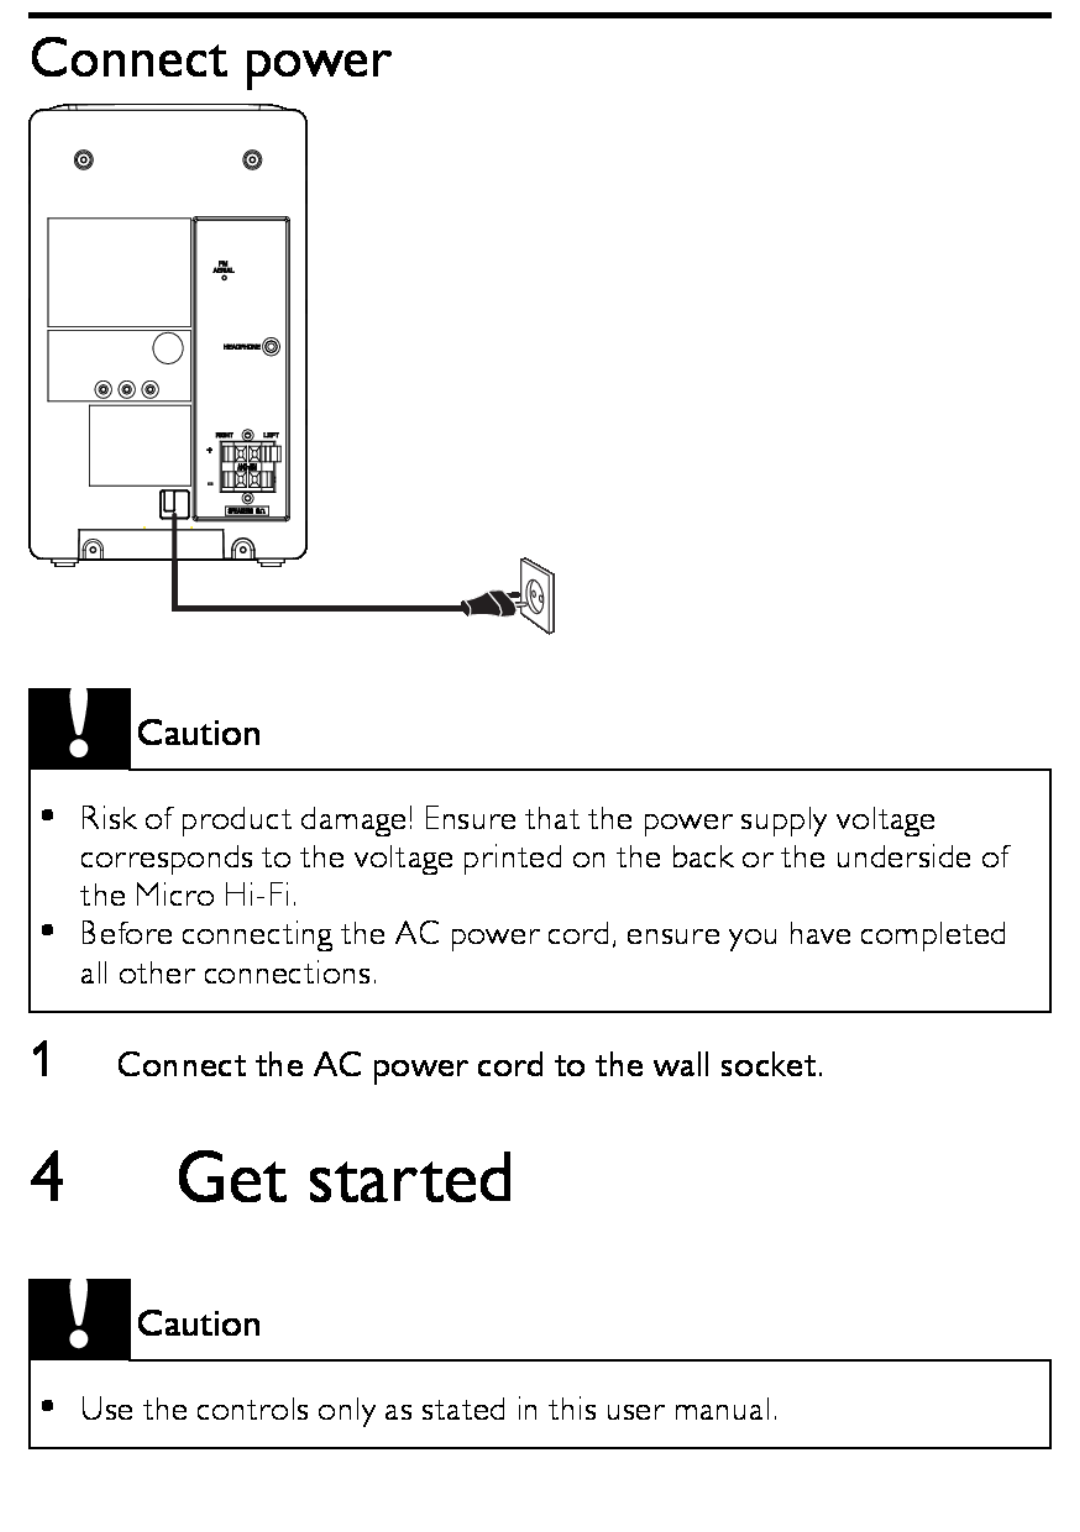 Philips MCM166/12 user manual Get started, Connect power 